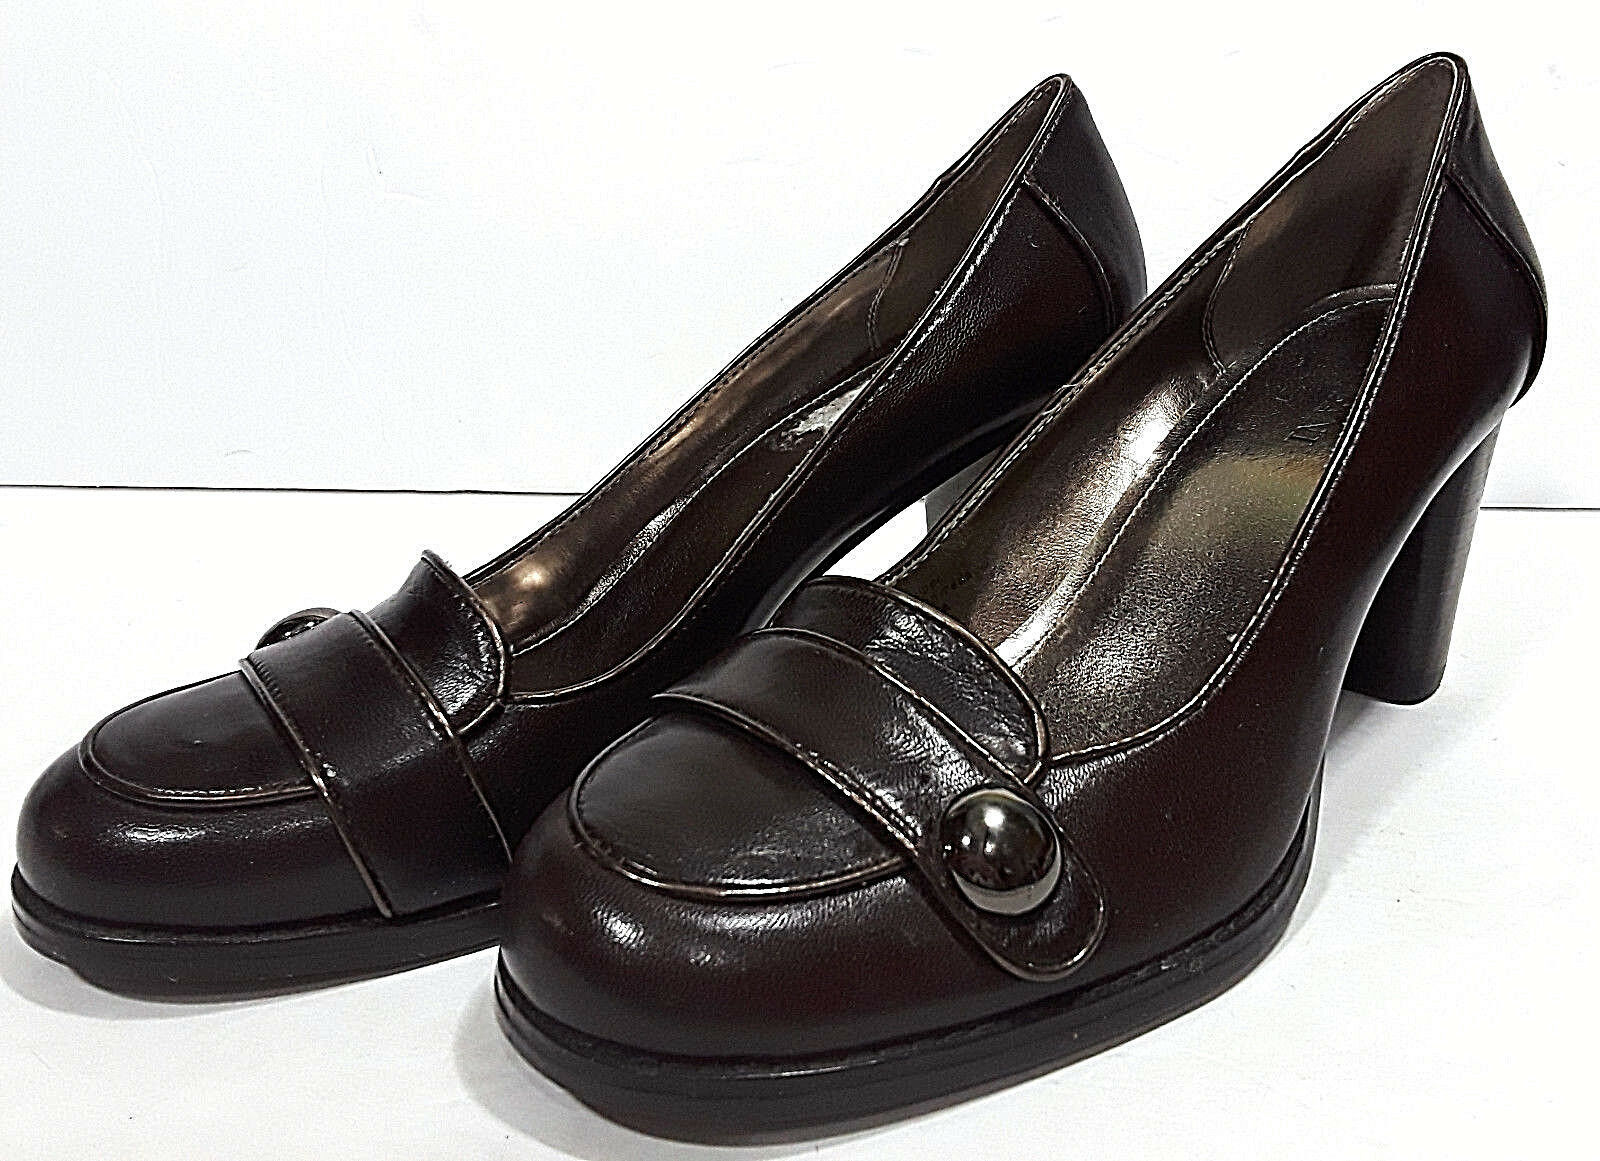 Primary image for New ALFANI Brown Leather Dress Shoes Womens 7.5M NANCY Loafer Heels Strap Button